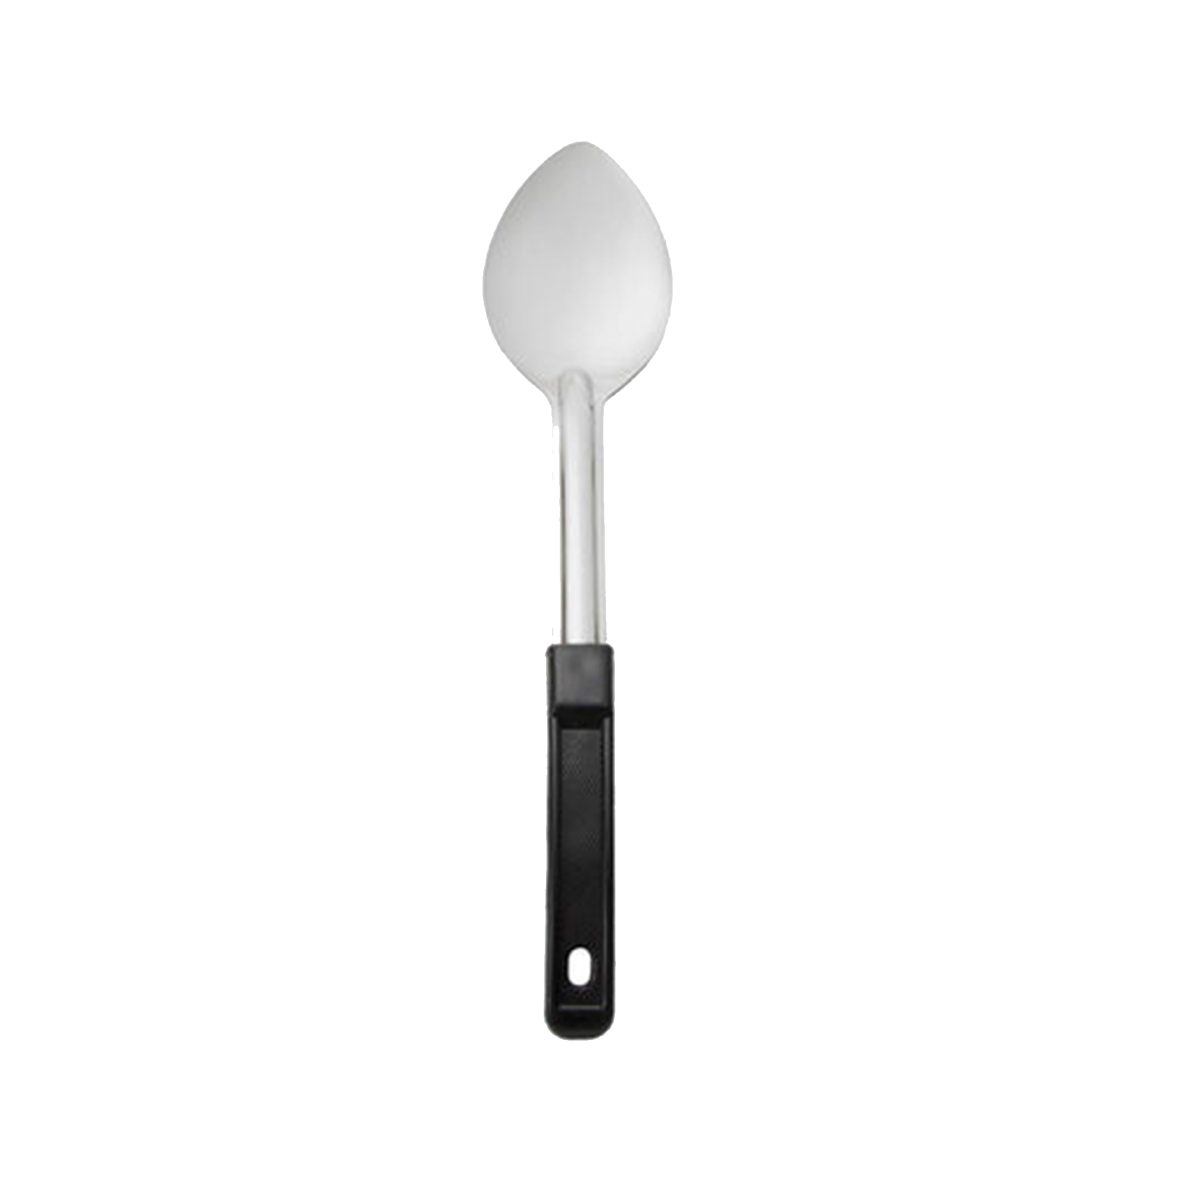 OXO 1130680 Good Grips 8 1/4 Small Wooden Spoon